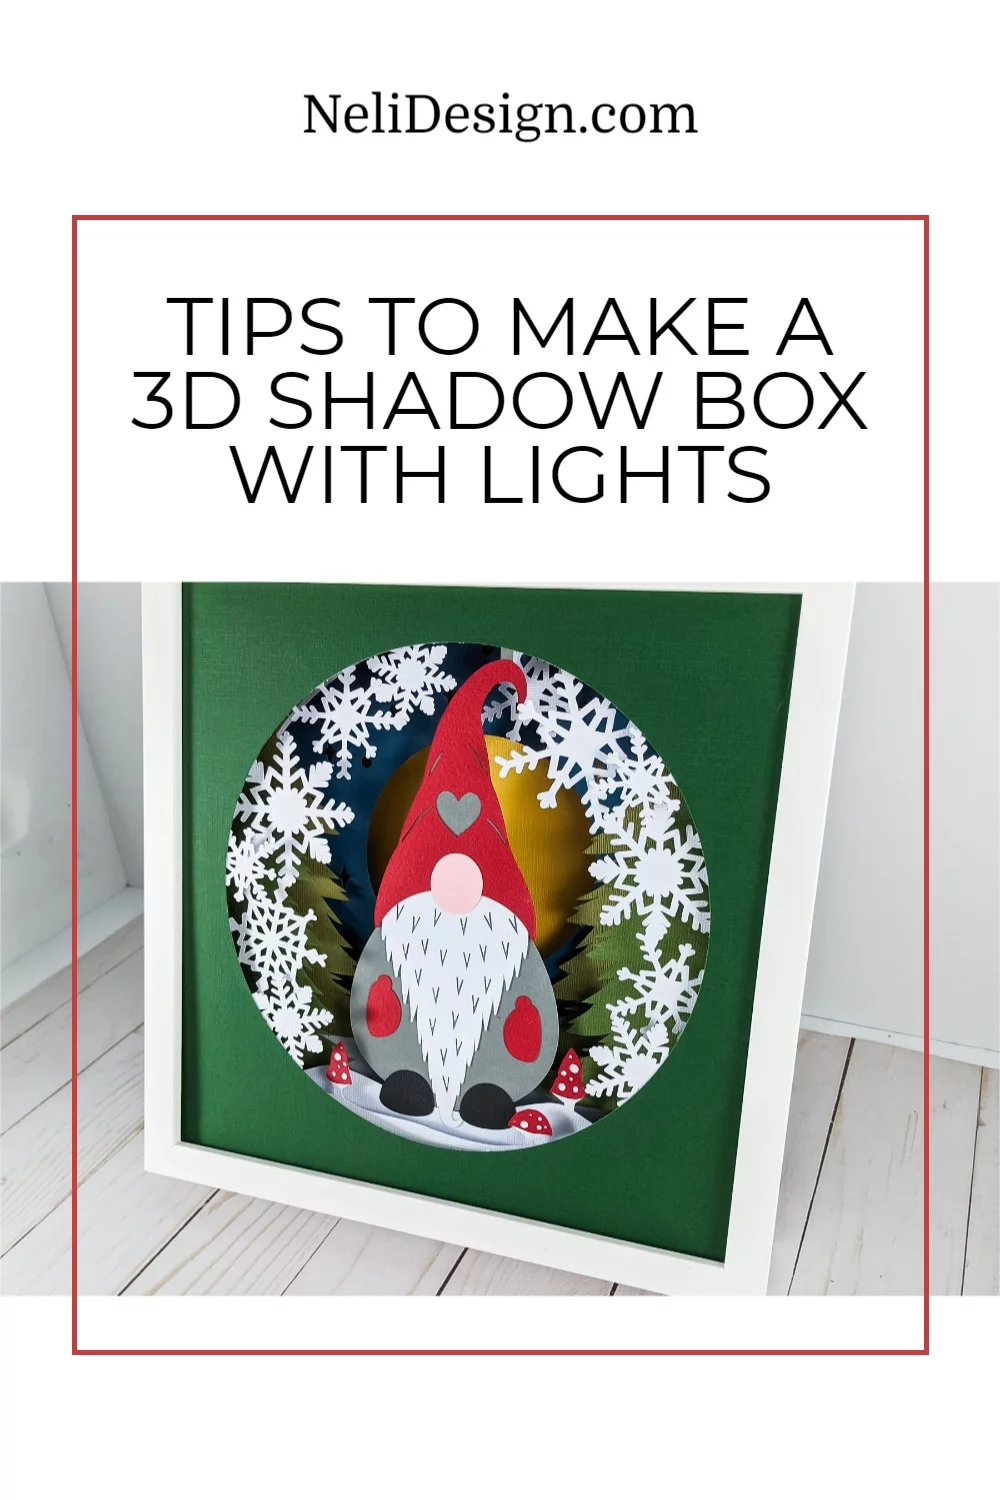 Tips to make a 3D shadow box with lights.